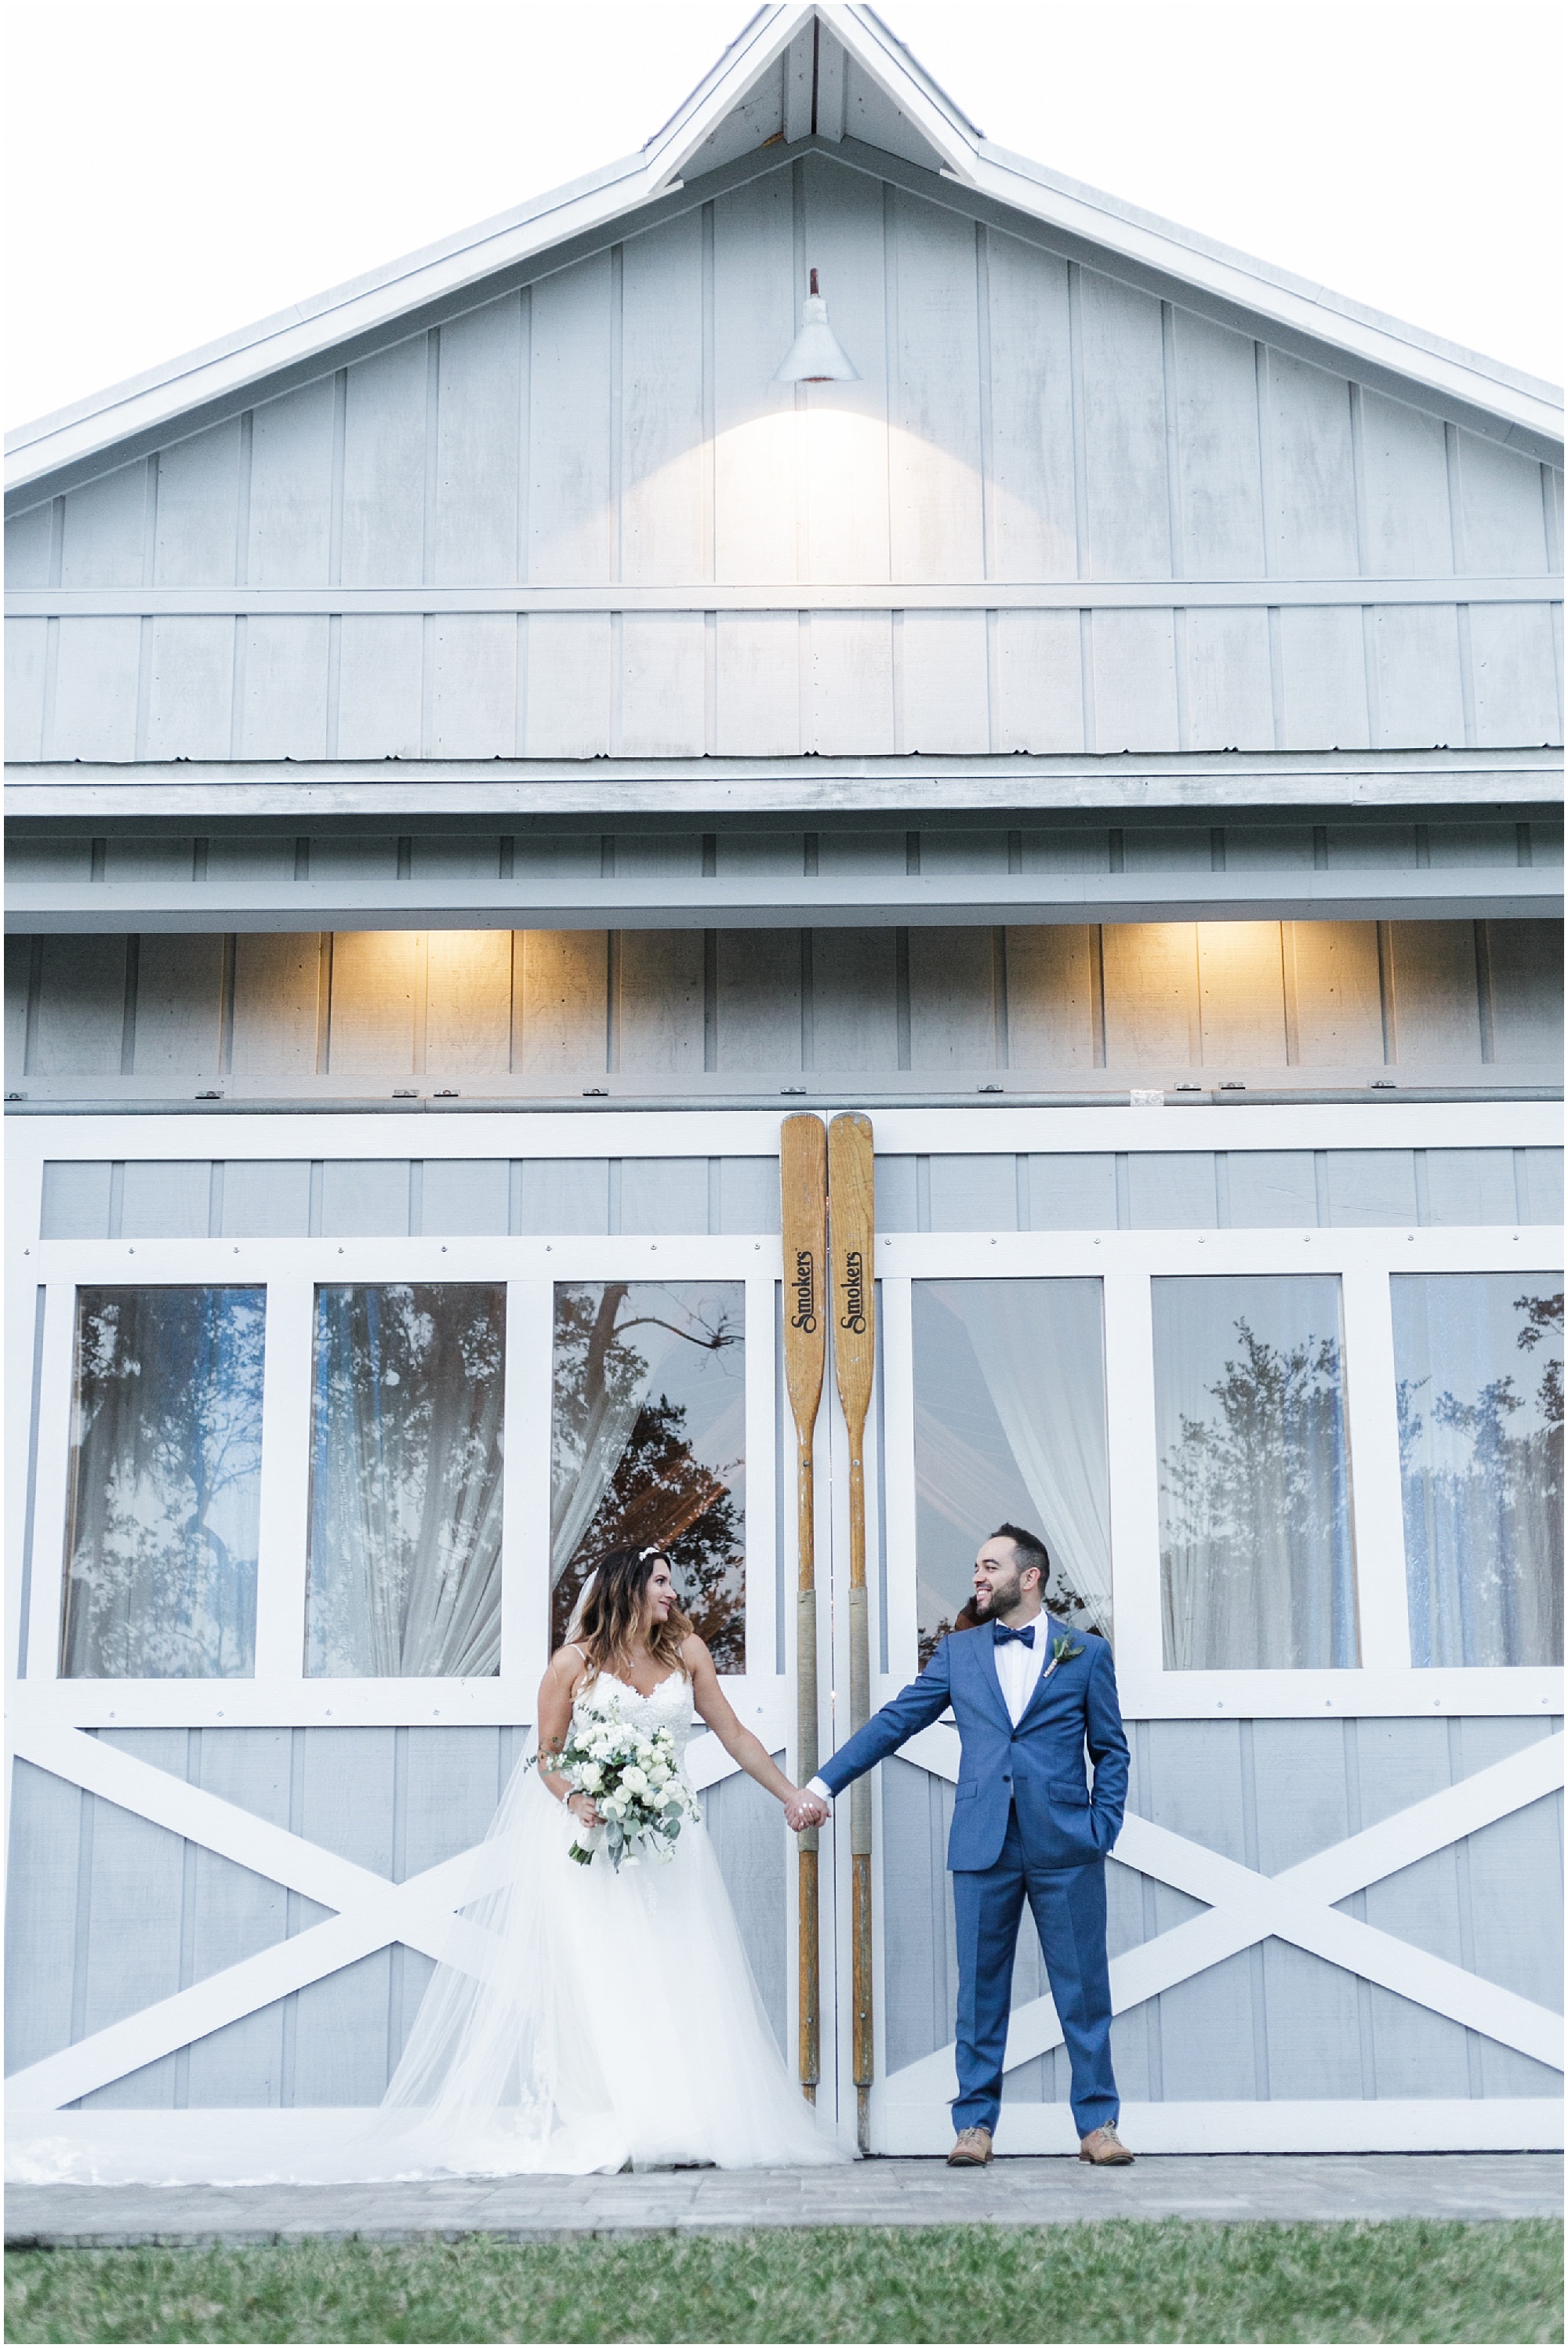 Bride and groom holding hands at country farm boathouse doors